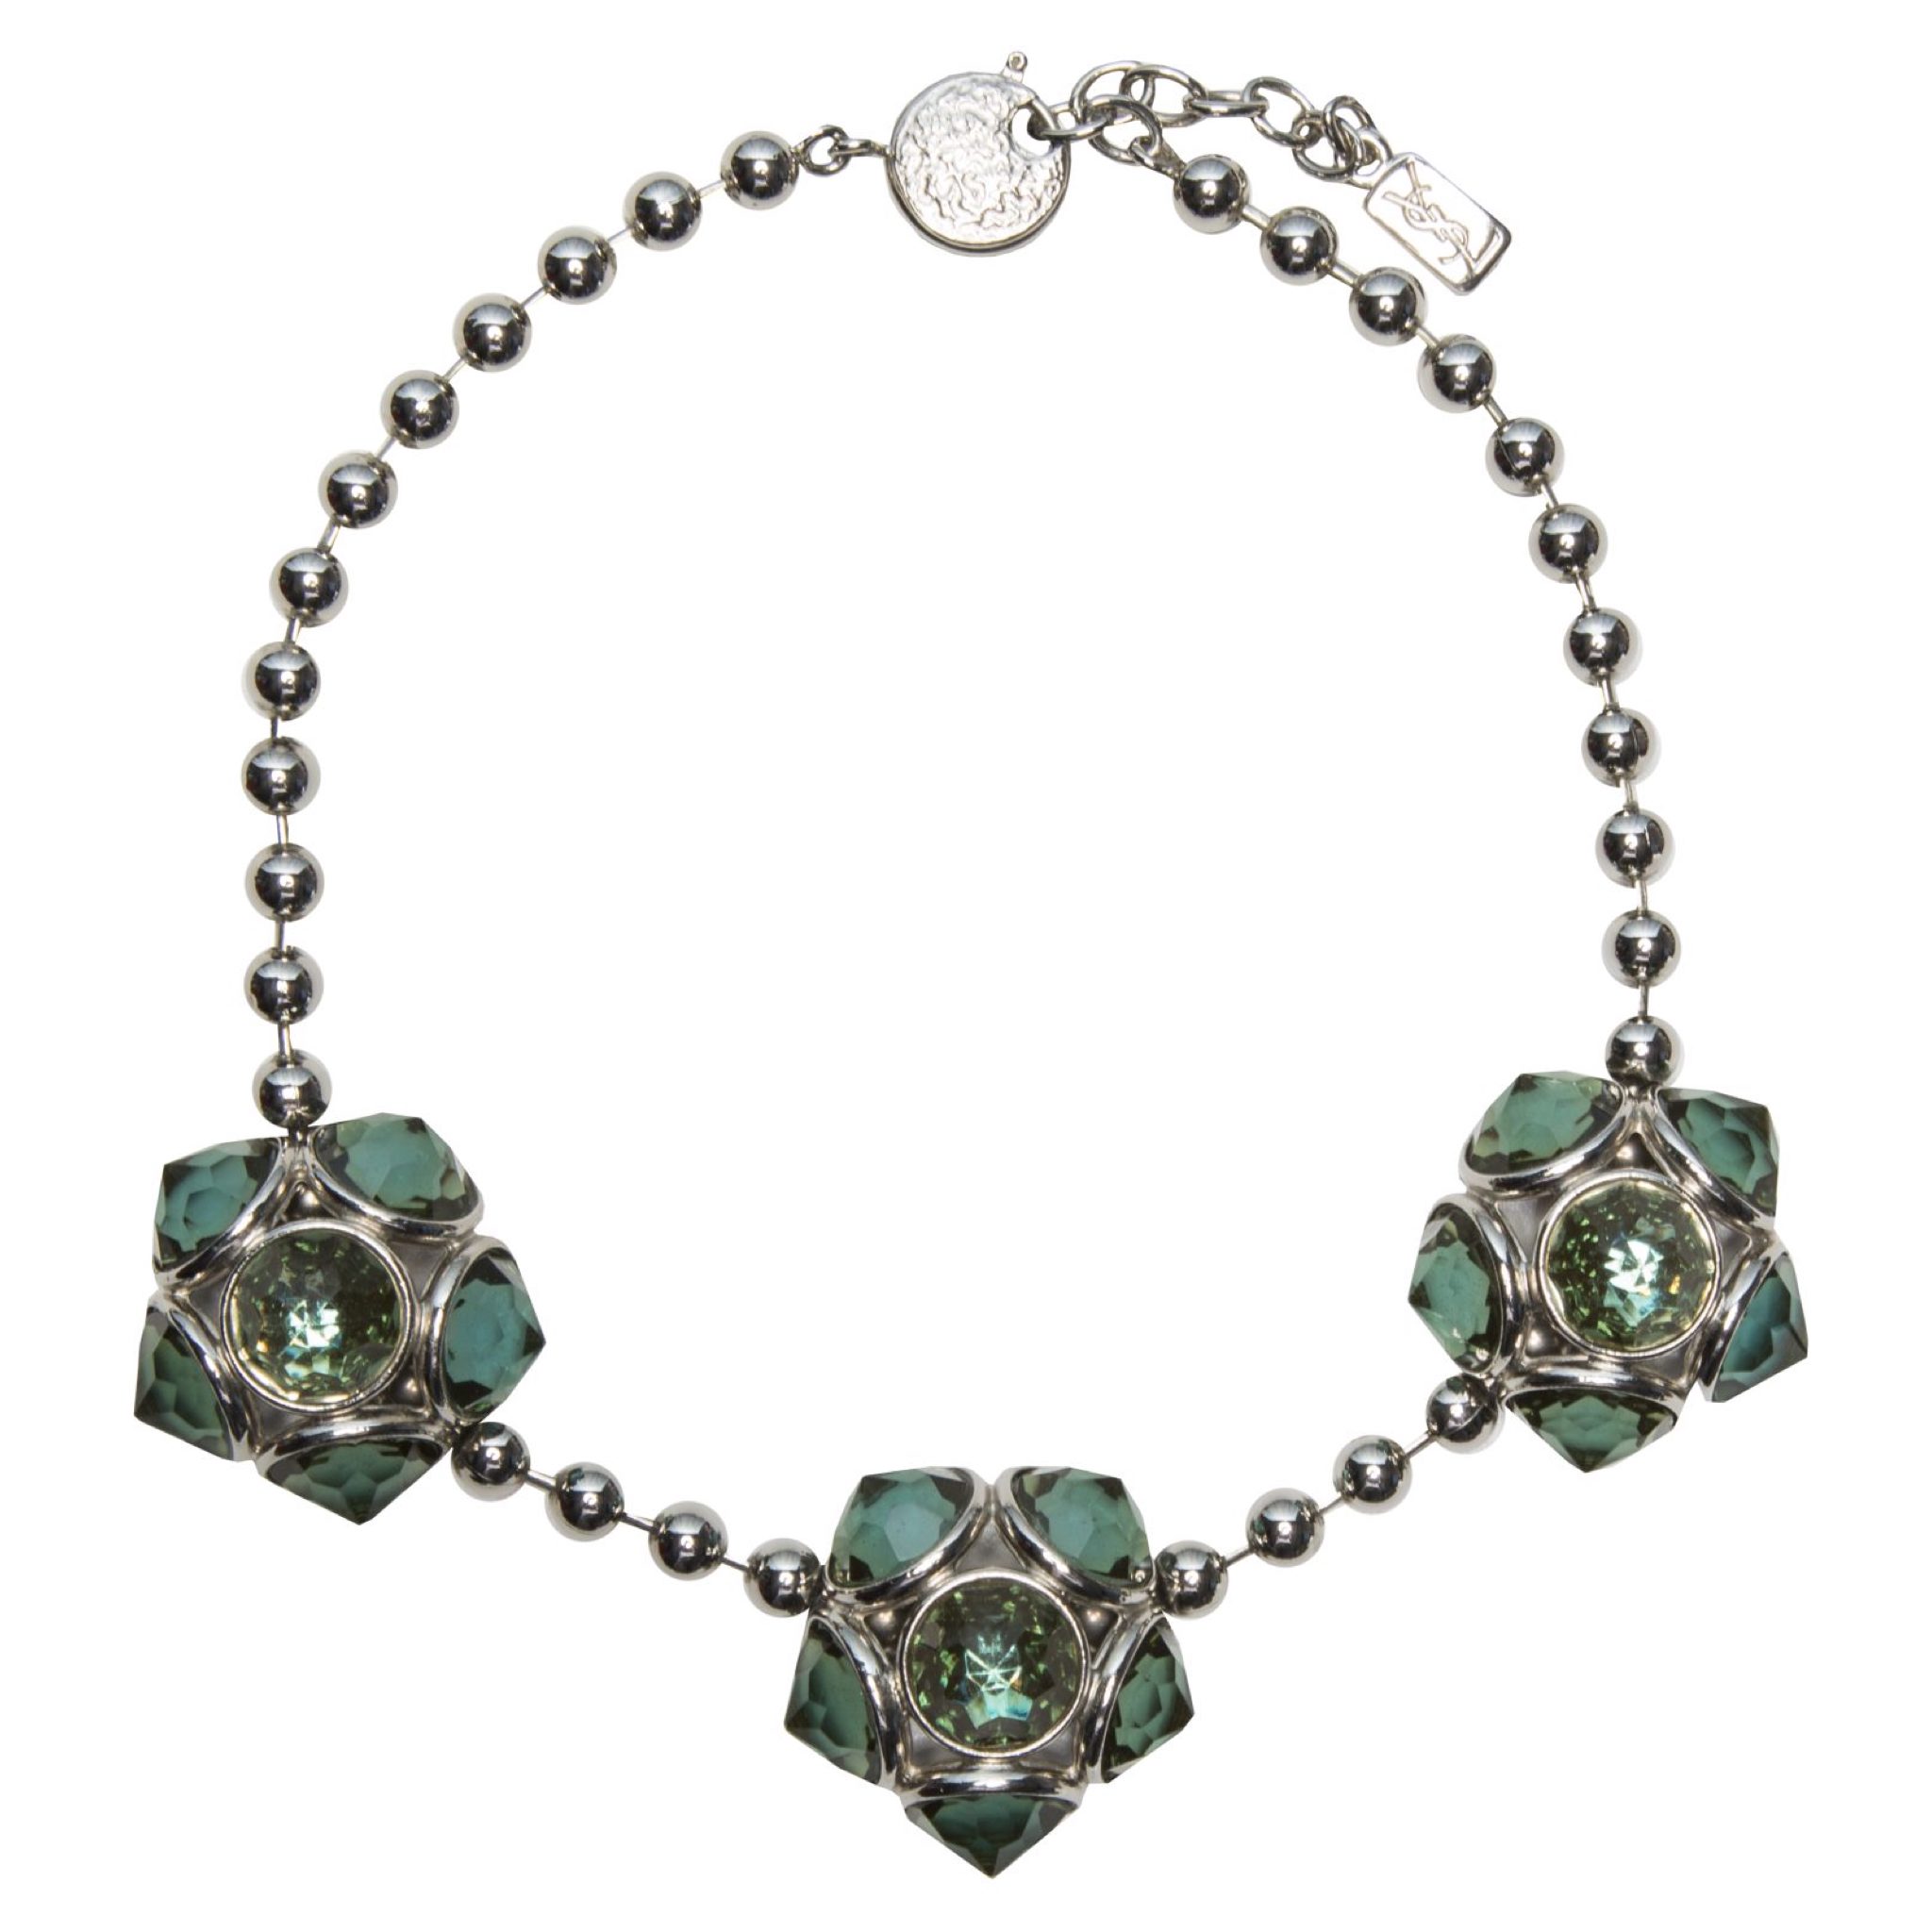 Vintage faced green stones round necklace